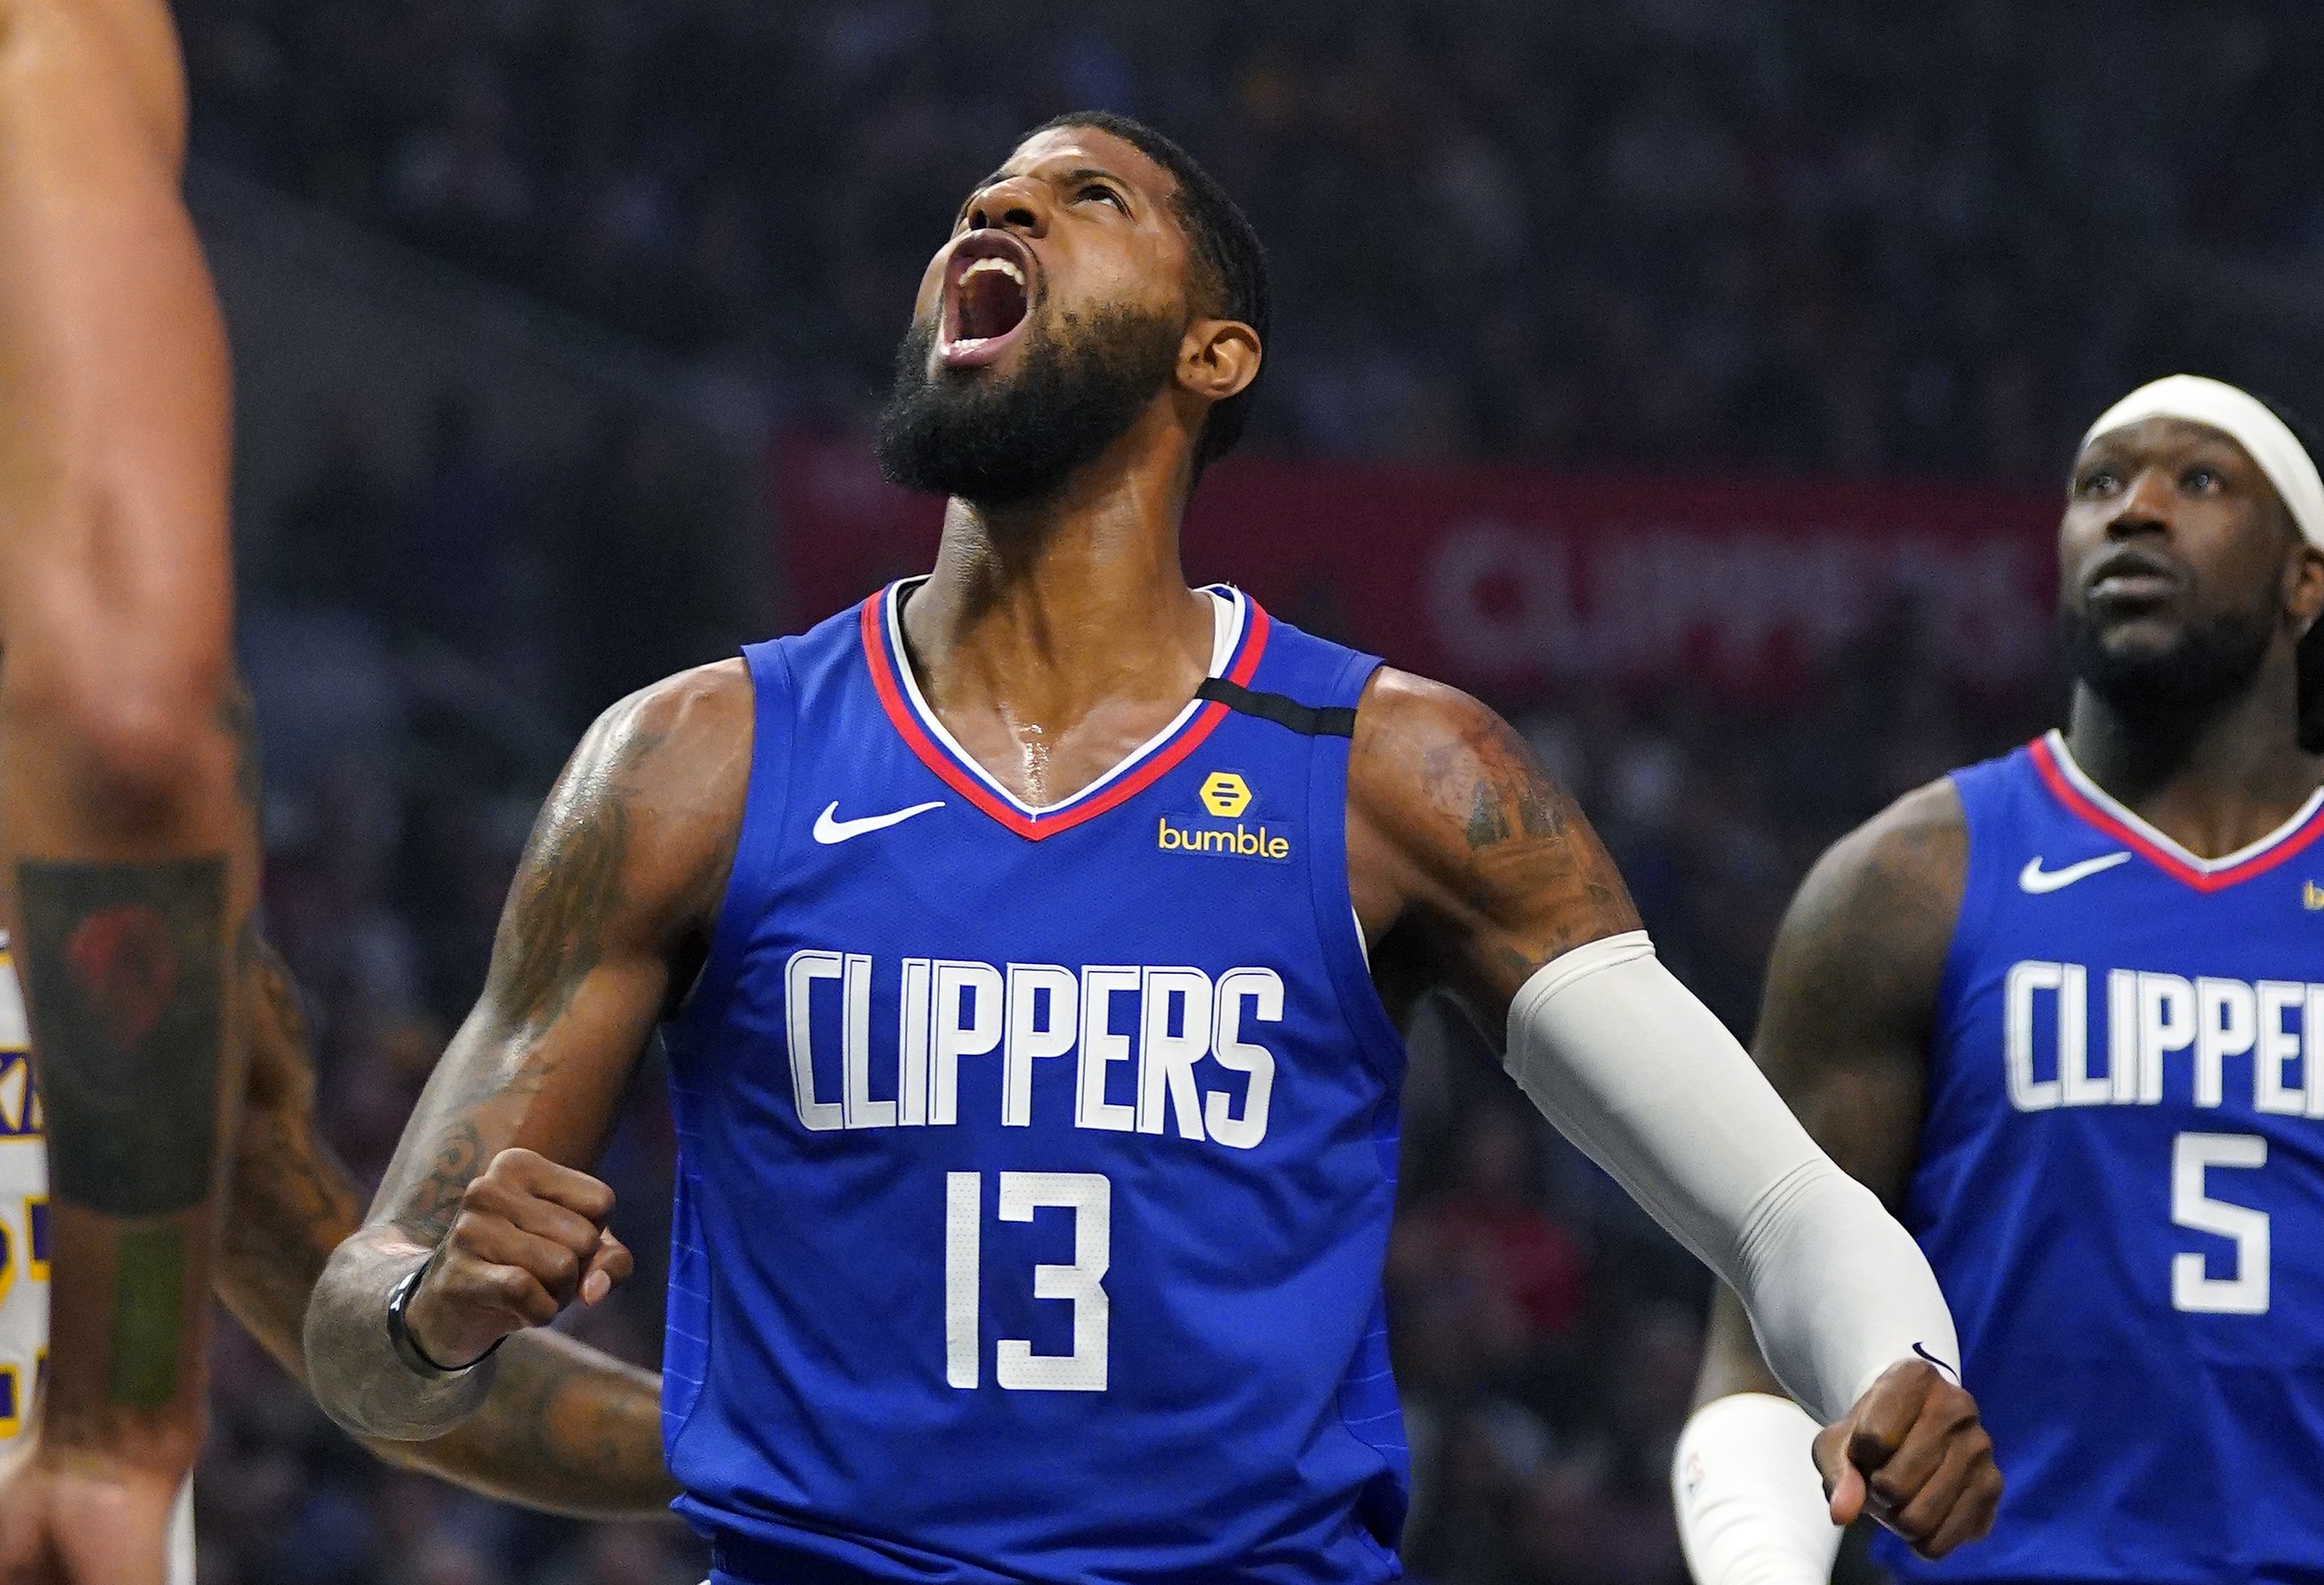 Blake Griffin elevates for a jumper in red Clipper jersey - Clippers News  Surge NBA Gallery - Los Angeles Clippers Pictures & Photos